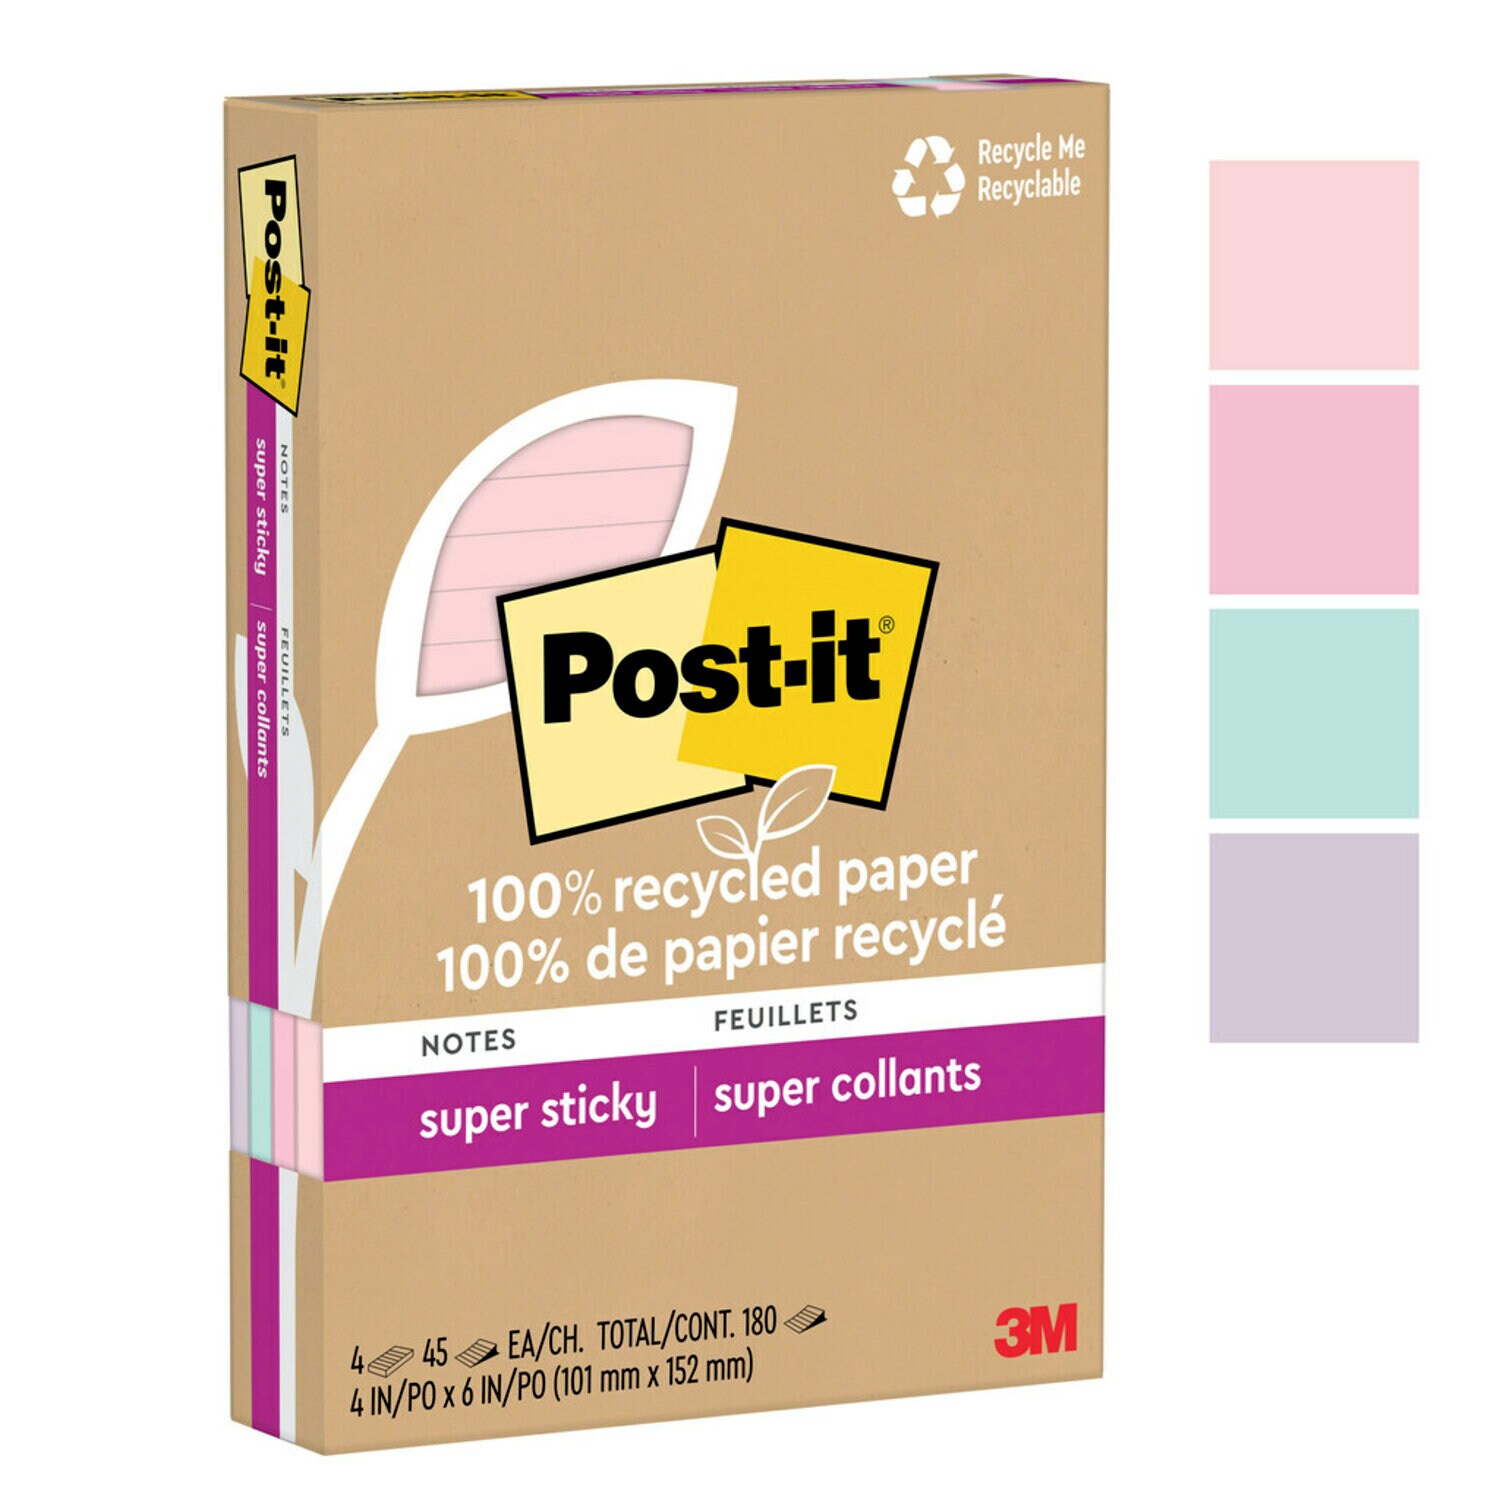 7100290210 - Post-it Super Sticky Recycled Notes 4621R-4SSNRP, 4 in x 6 in (101 mm x 152 mm)